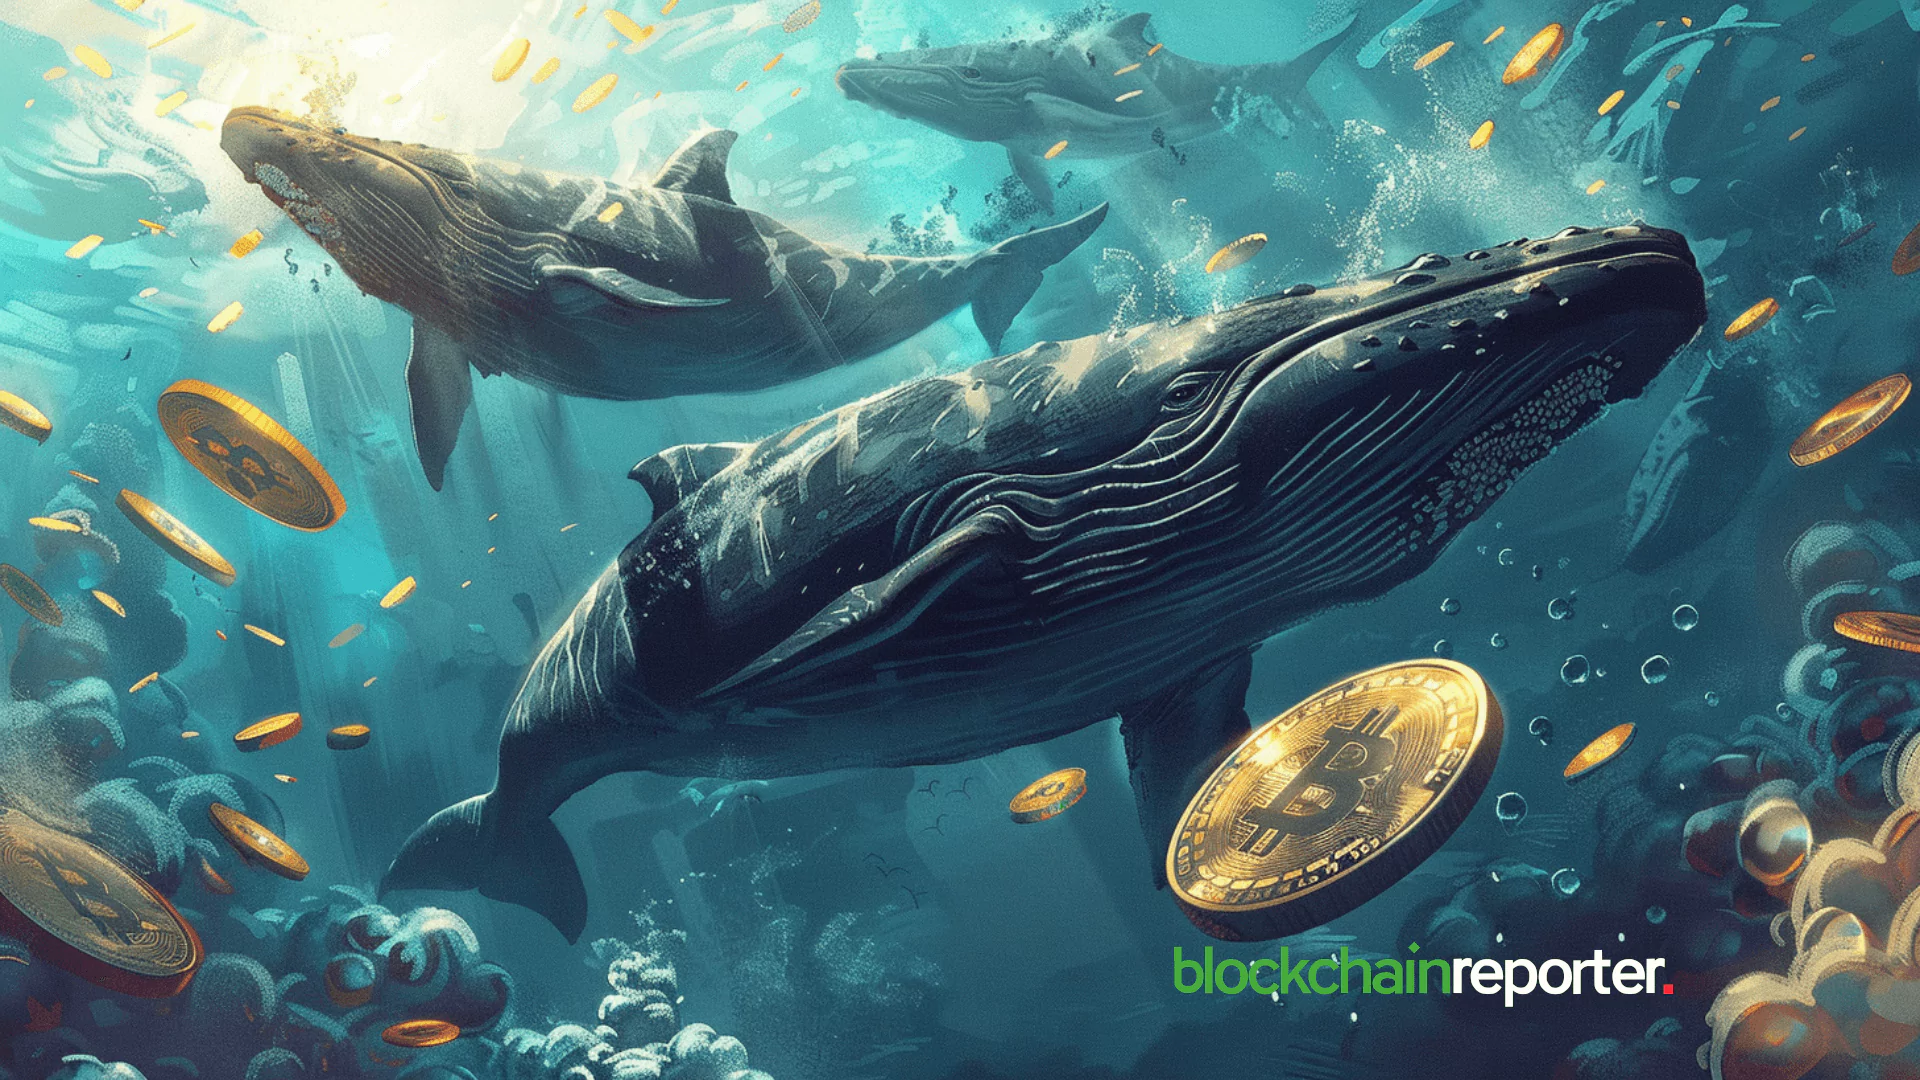 Bitcoin Whale Moves $206M to Binance Amid Market Downturn